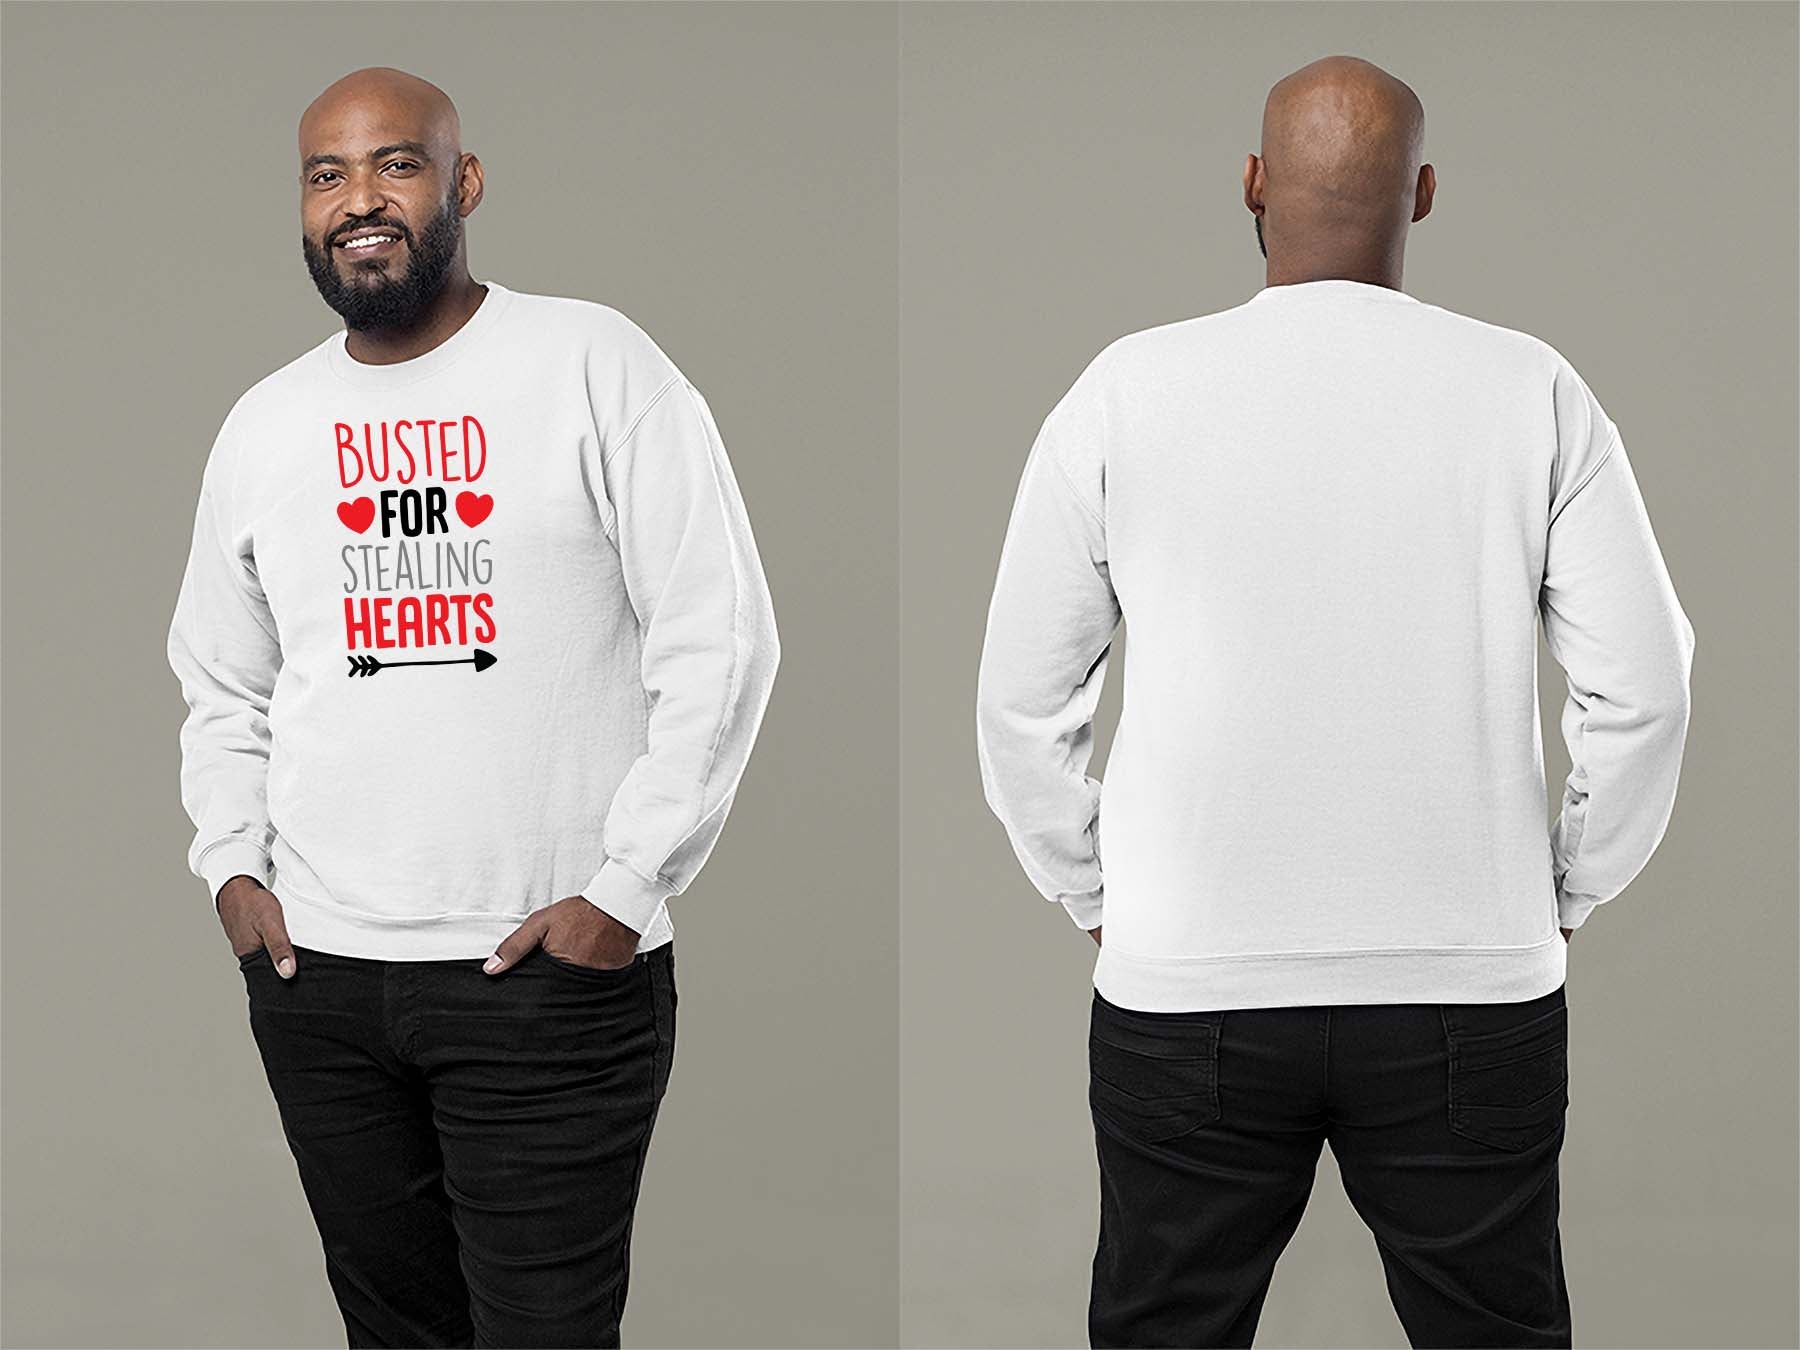 Fat Dave Busted For Stealing Hearts Sweatshirt Small White